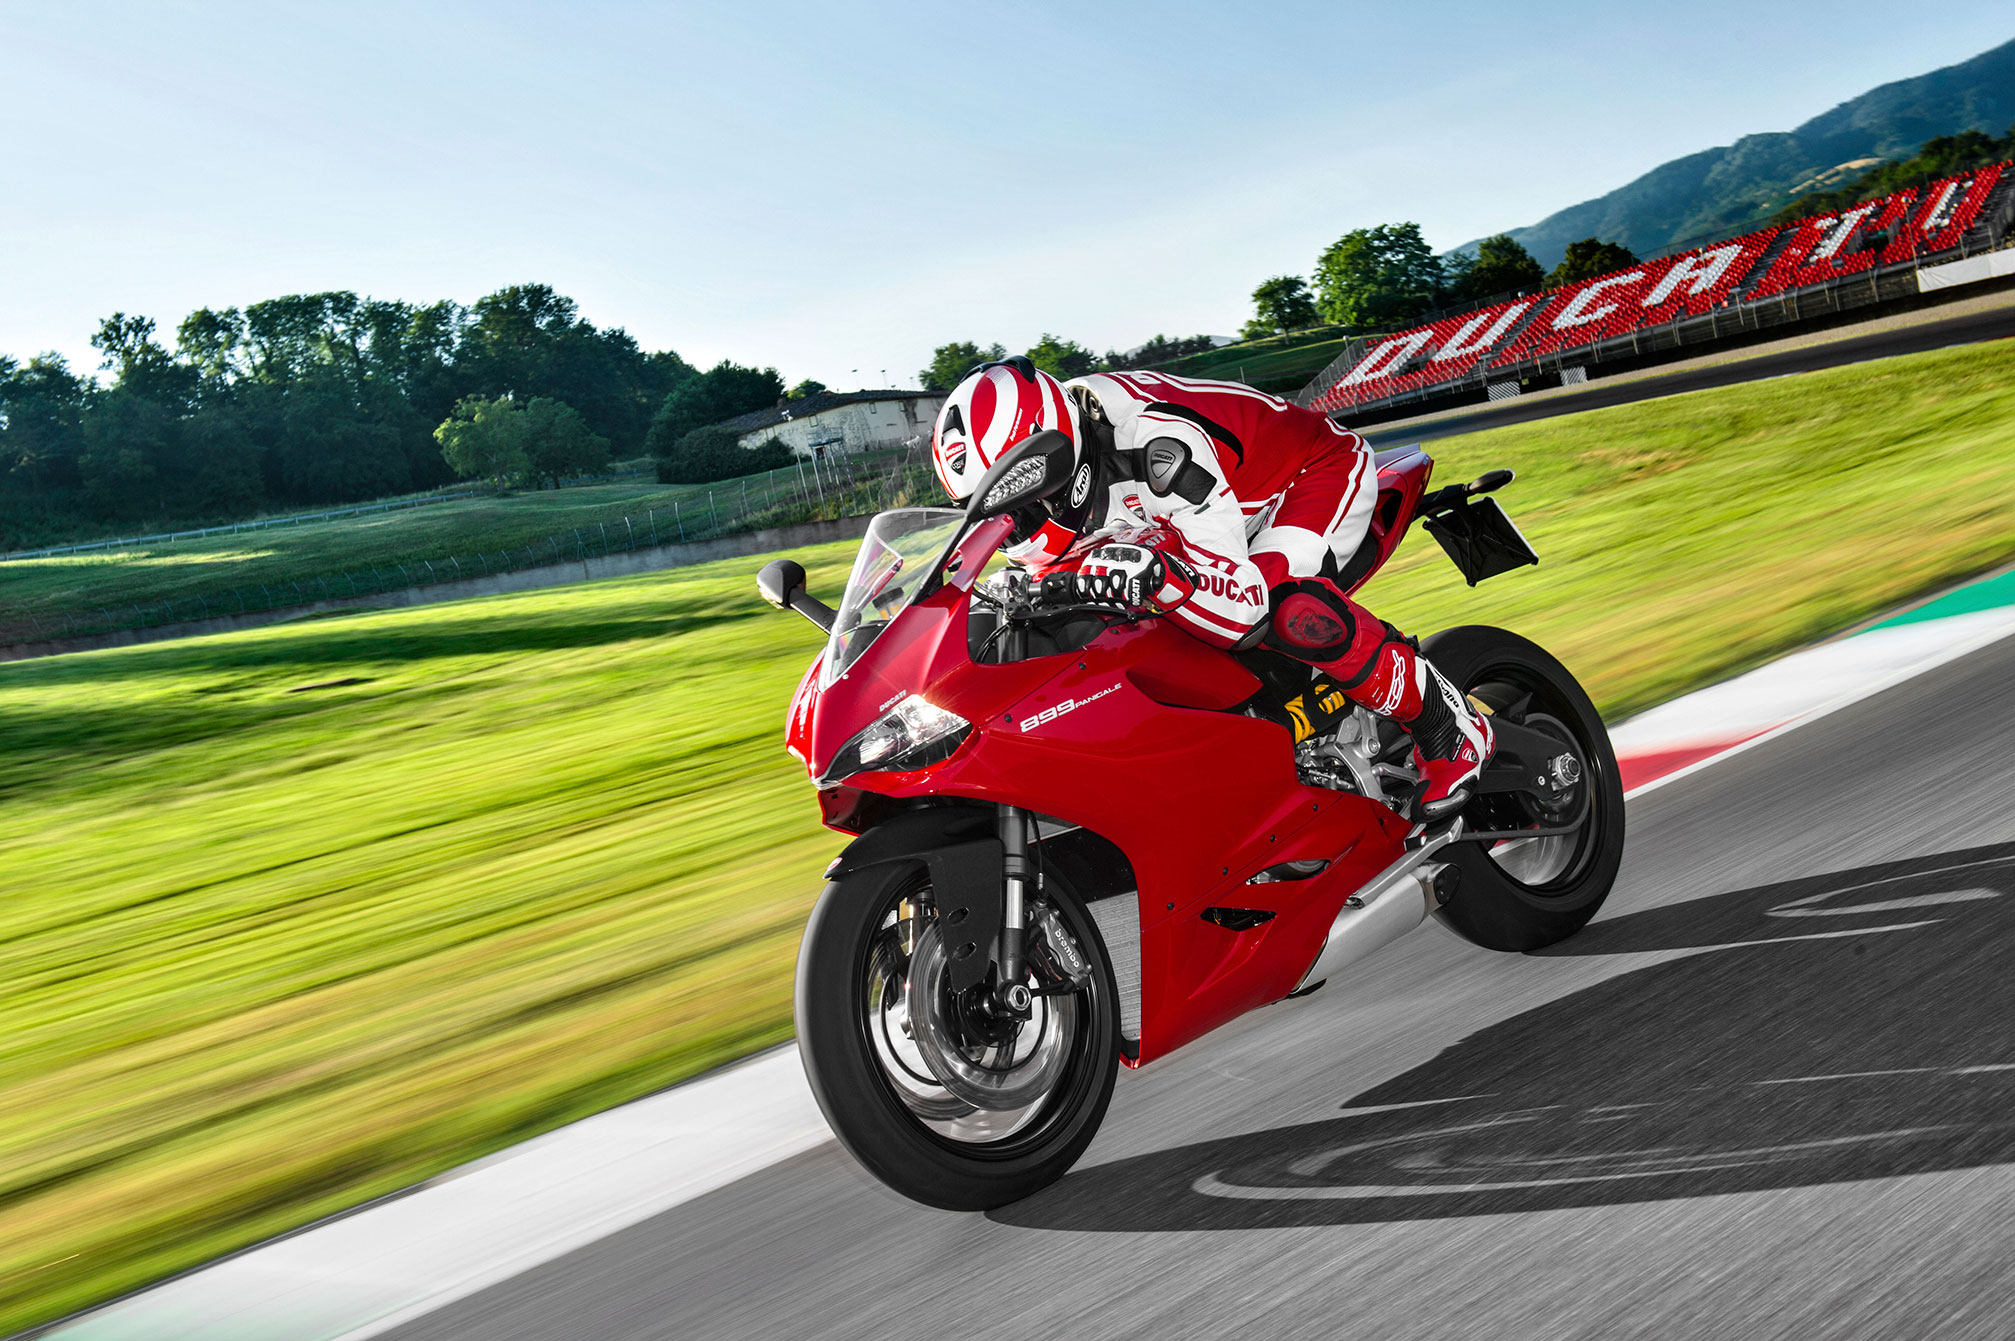 2015 Ducati Superbike 899 Panigale Review